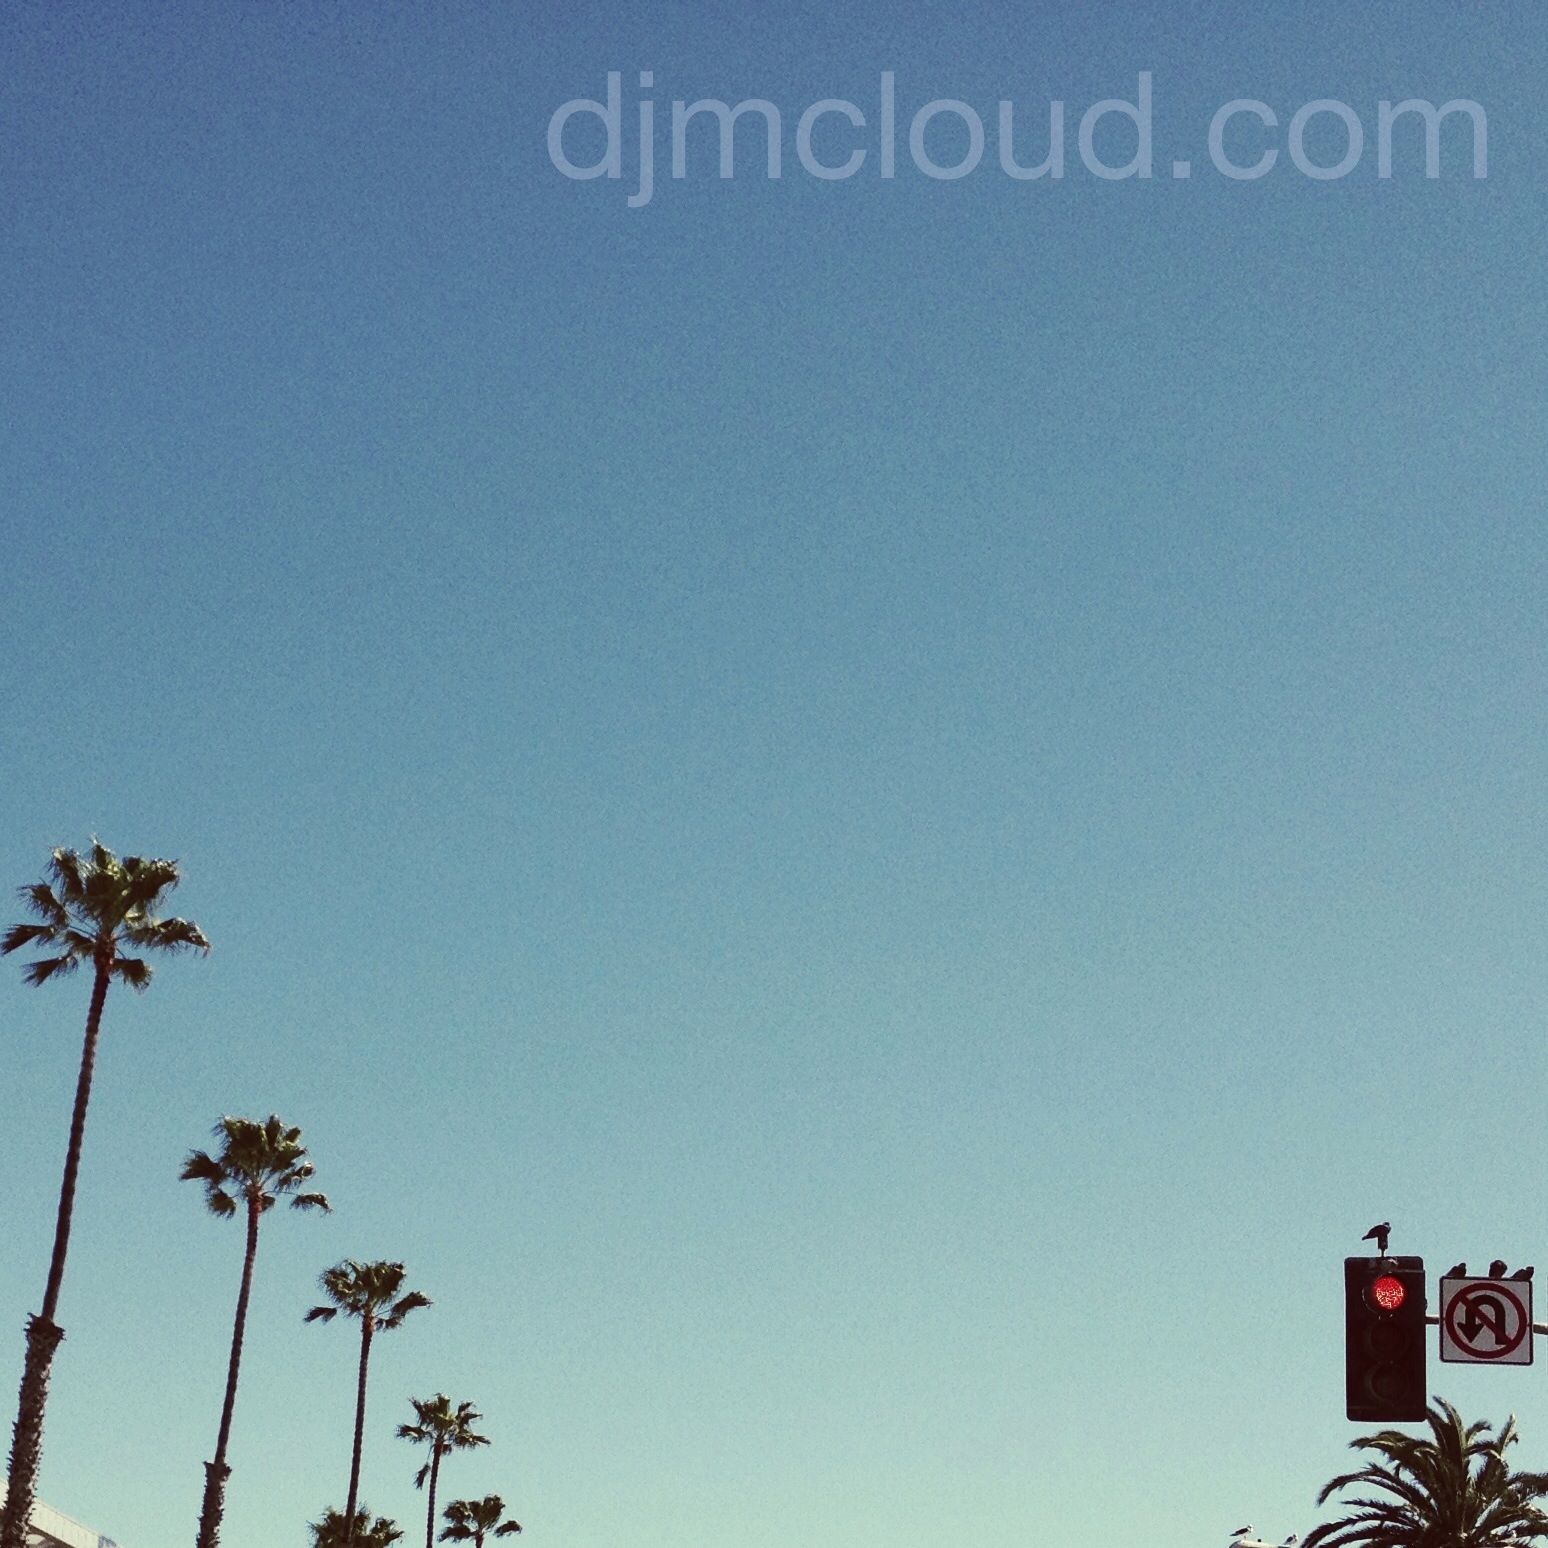 DJMcloud Podcast 76 – the minute it comes out